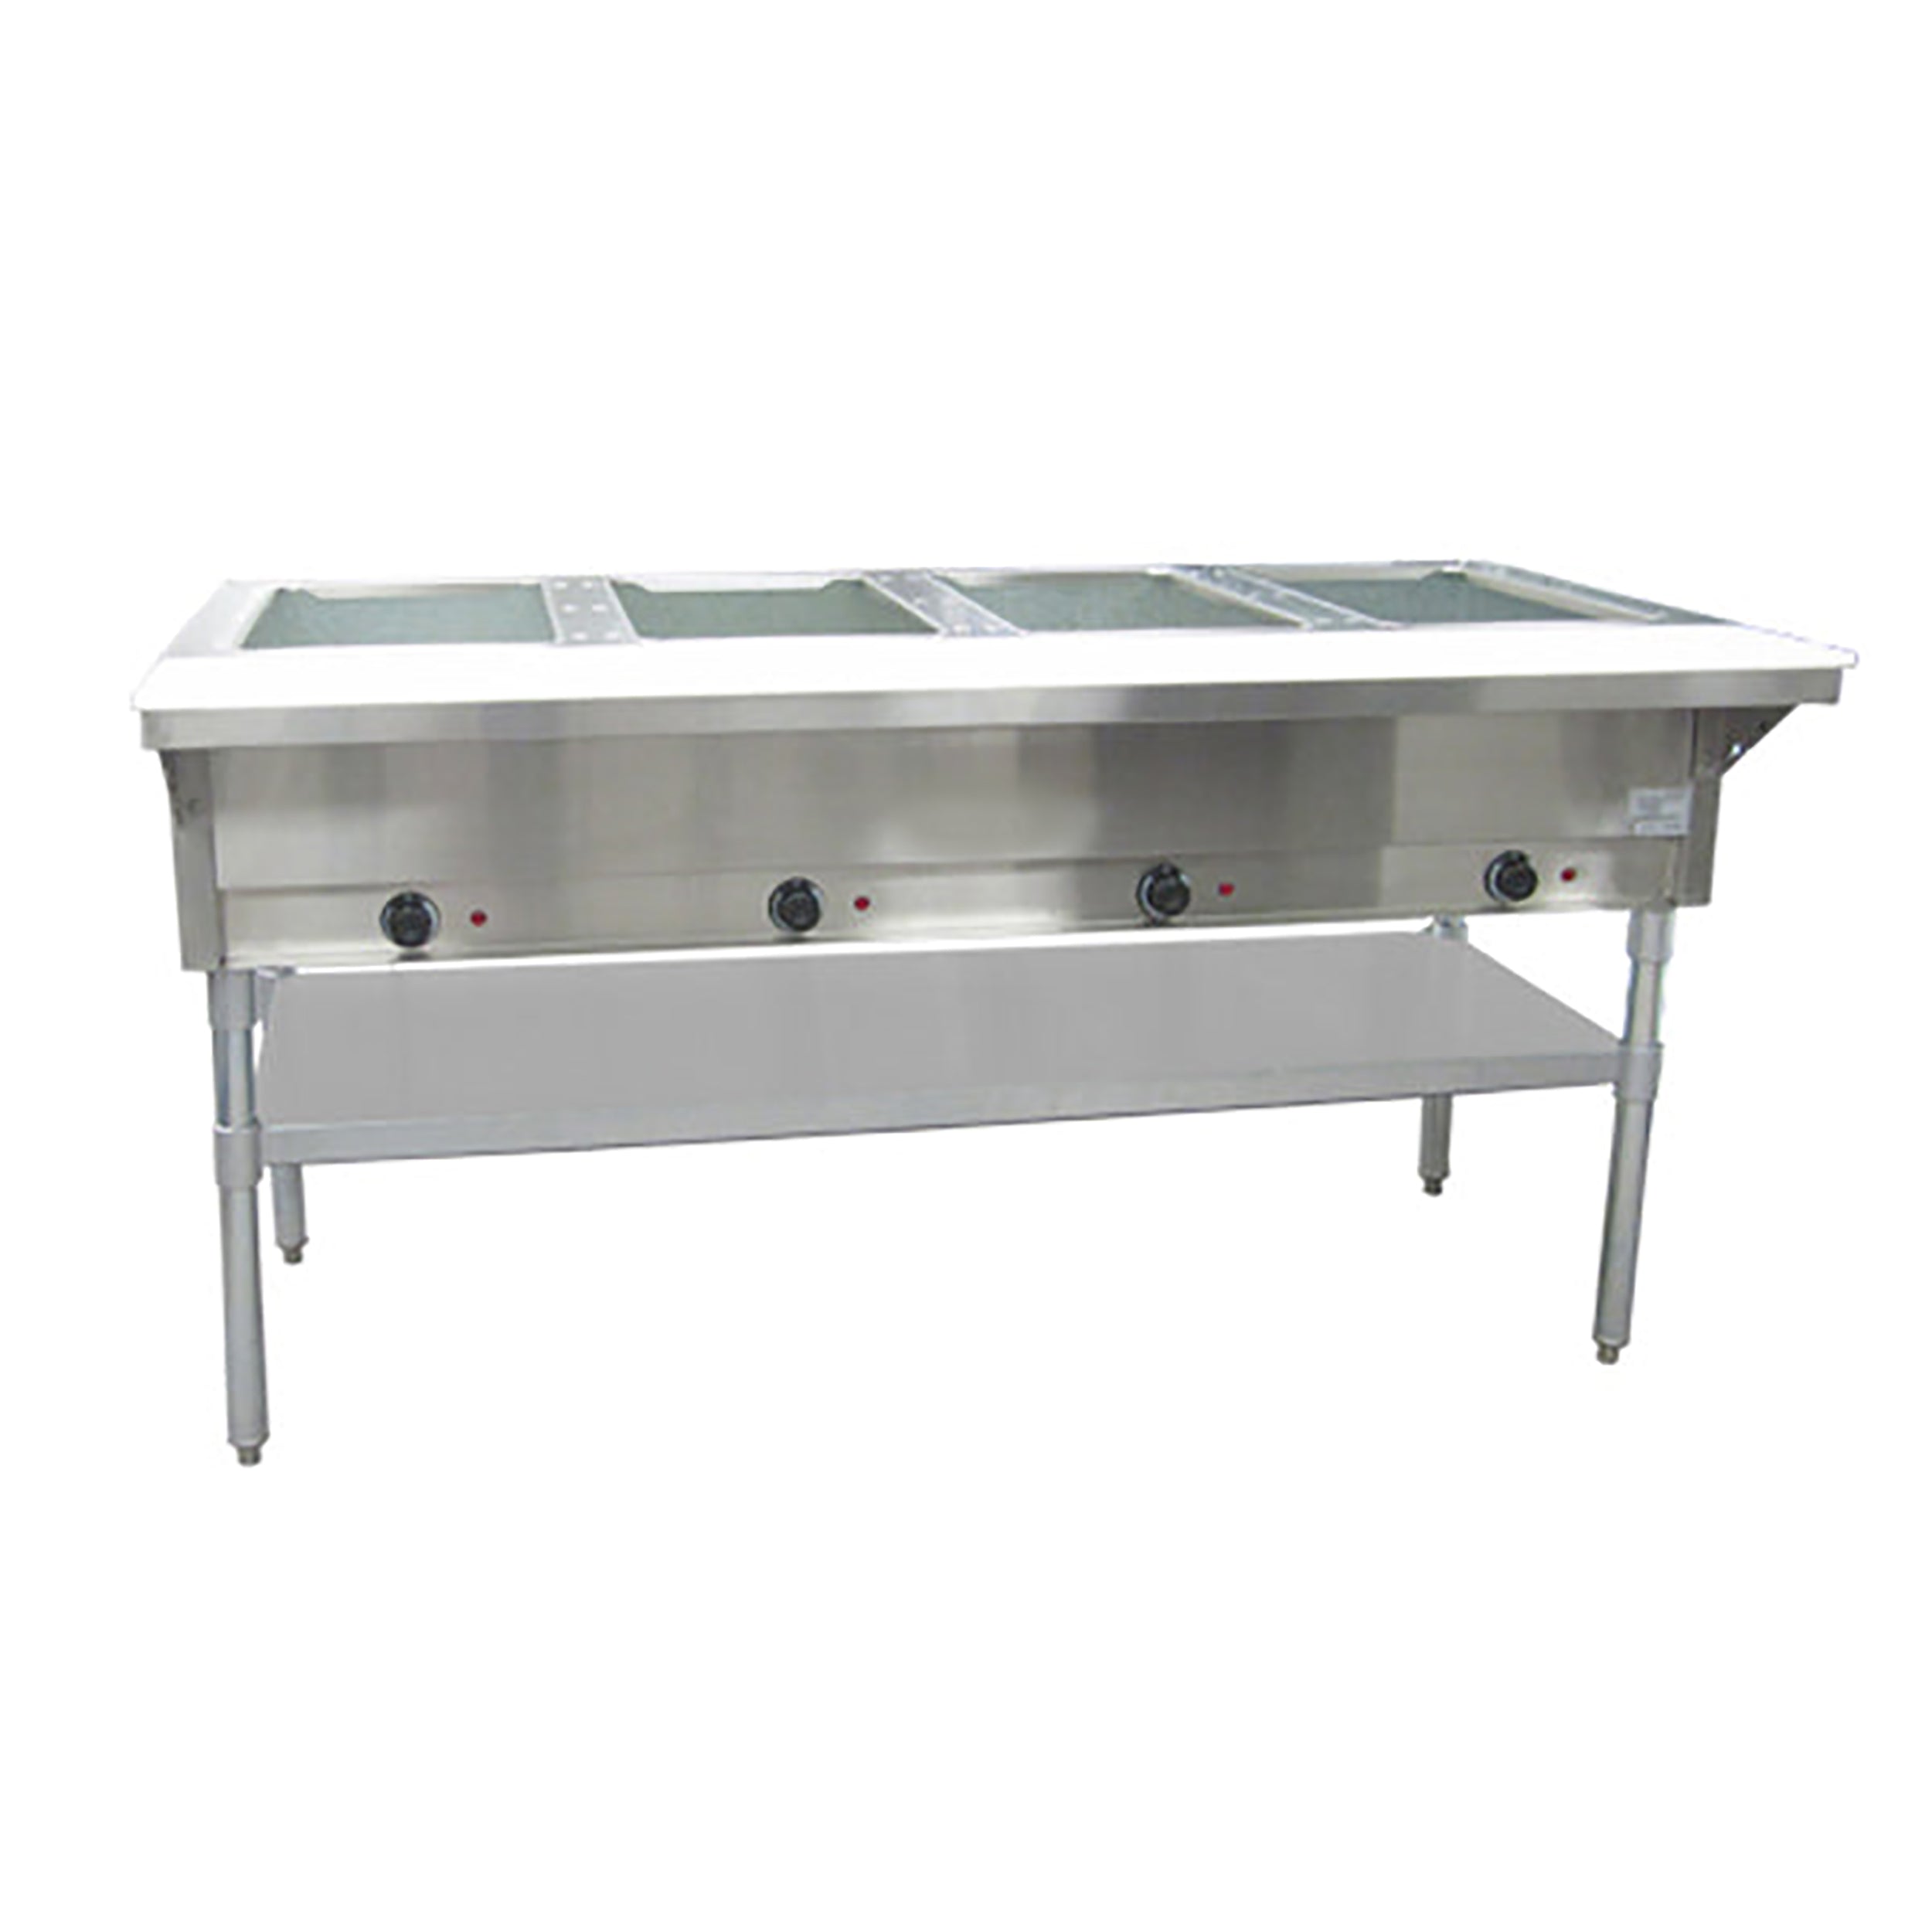 Adcraft ST-240/4 Hot Food Serving Counter / Table